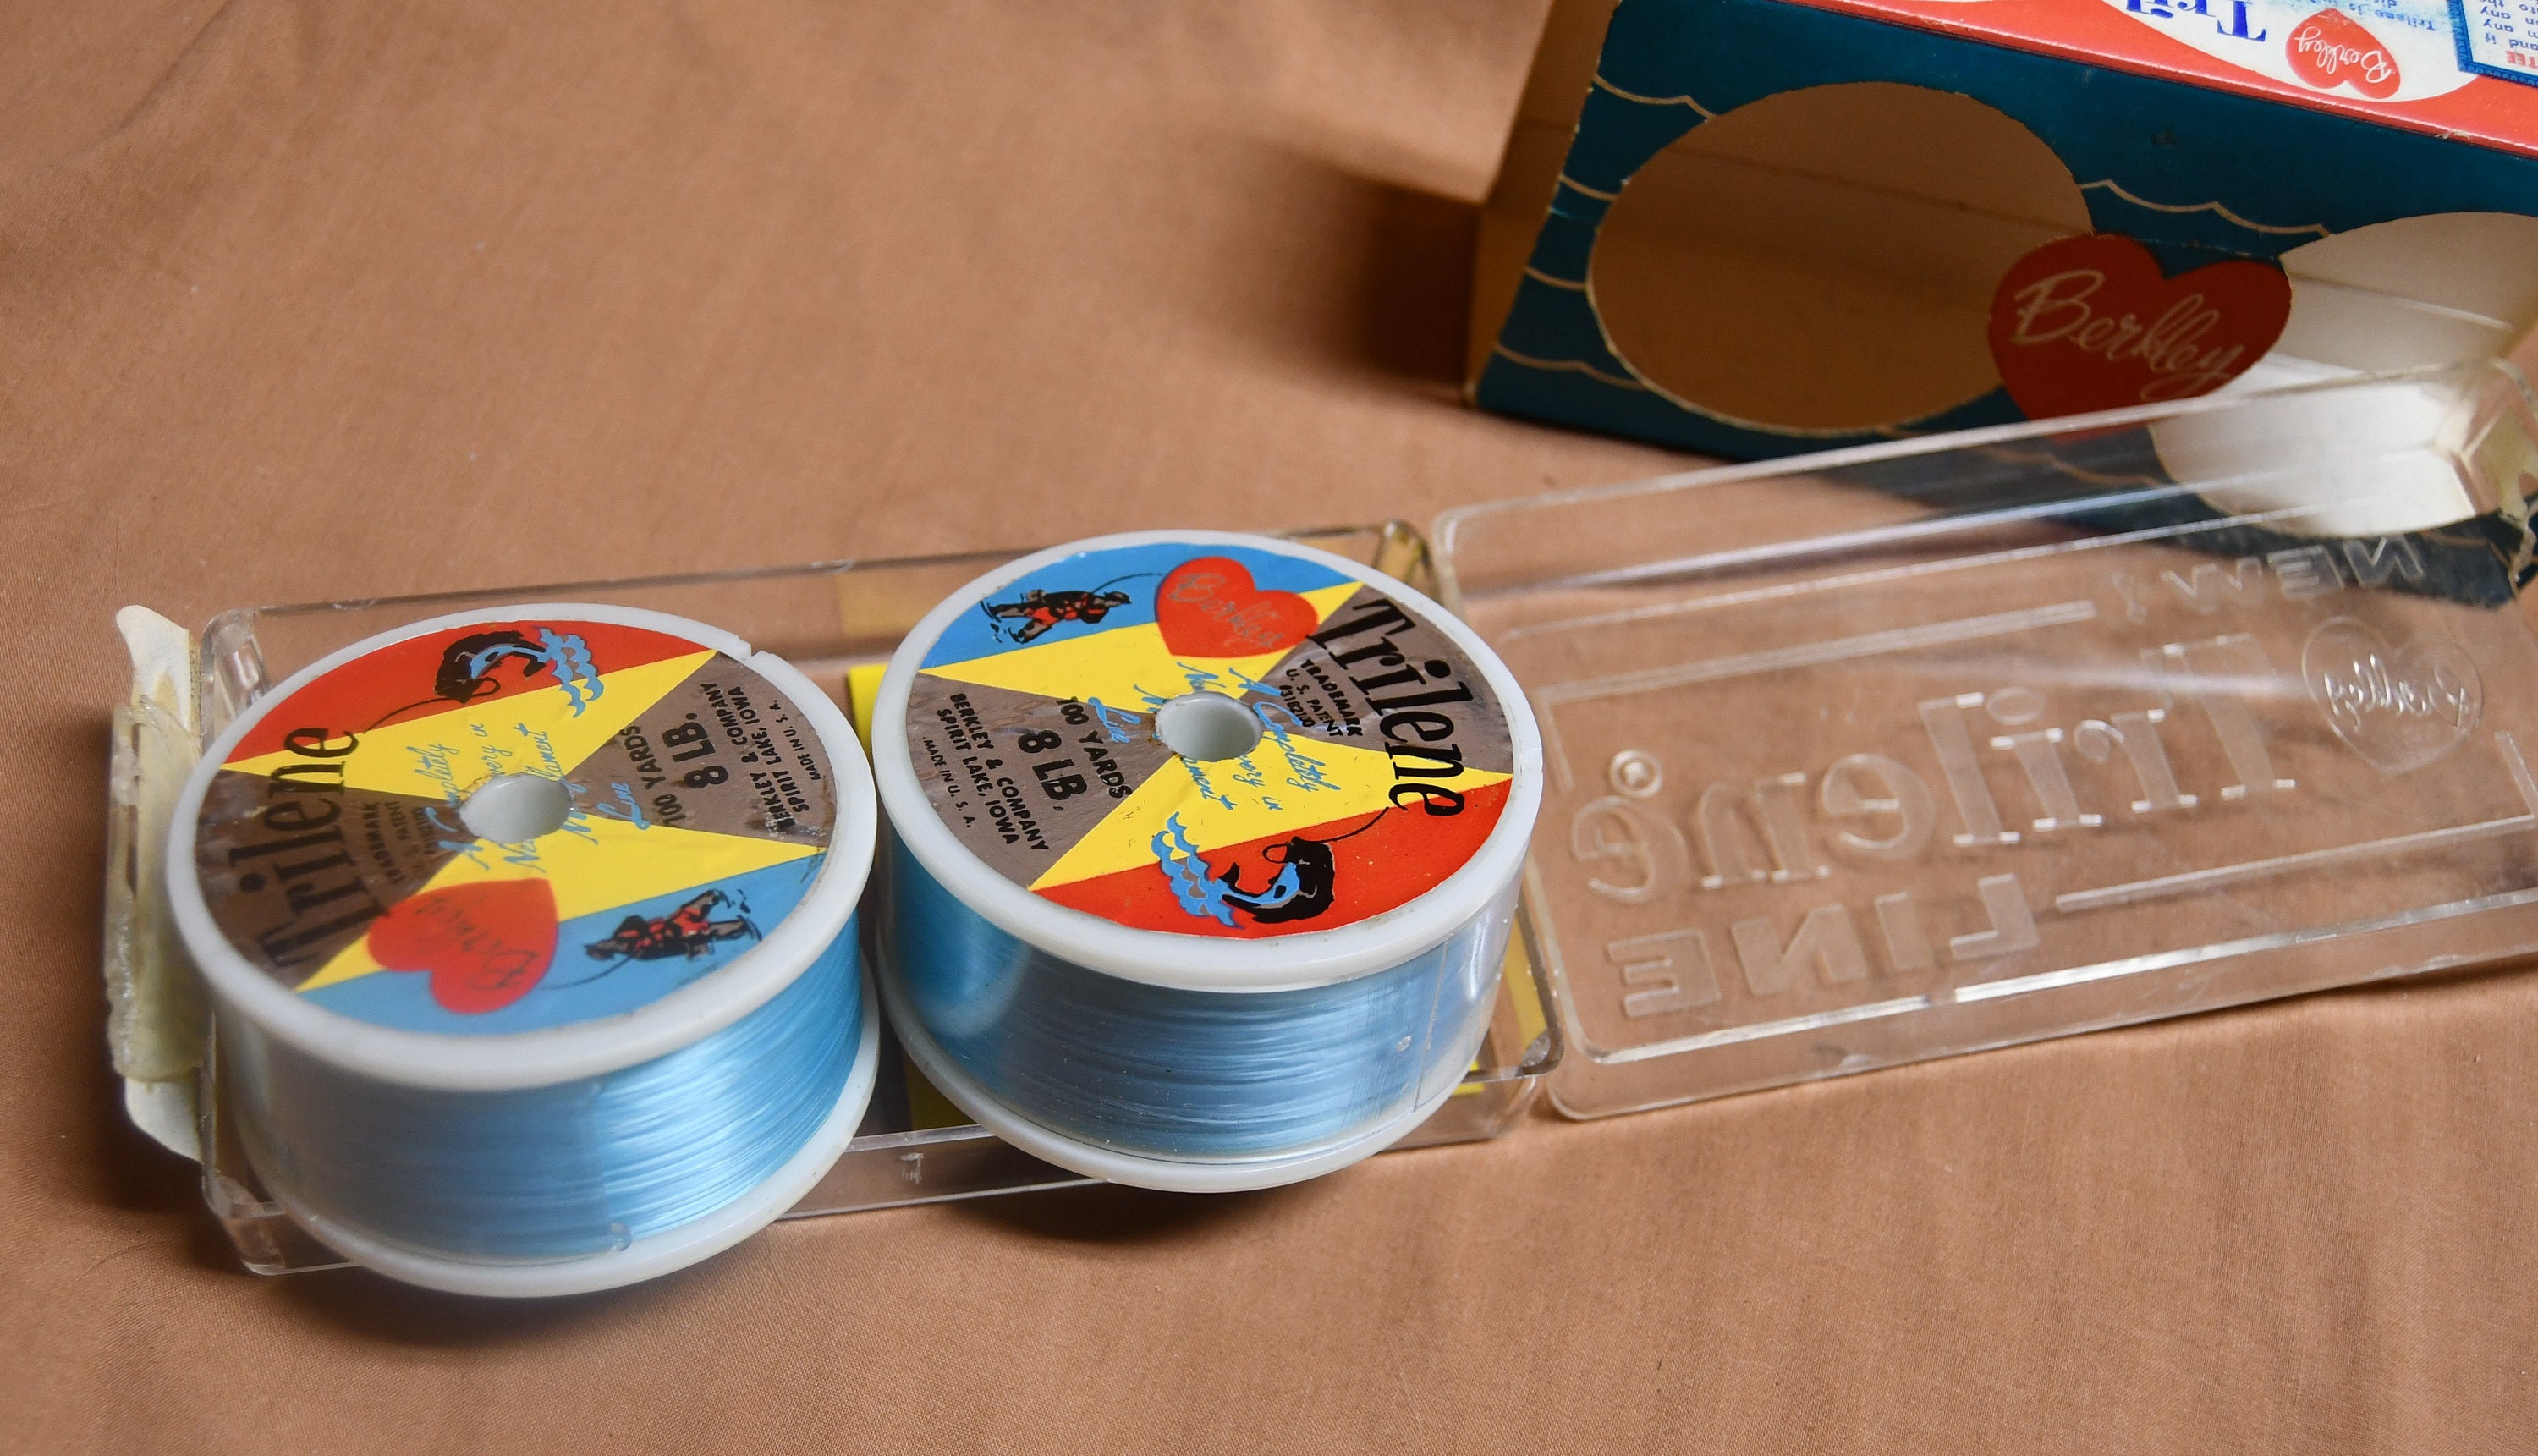 Buy Vintage Berkley Trilene-two Spools of 8 Pound Fishing Line New  Monofilament W/plastic Box, Cardboard Cover, Paper, Instructions Never Used  Online in India 